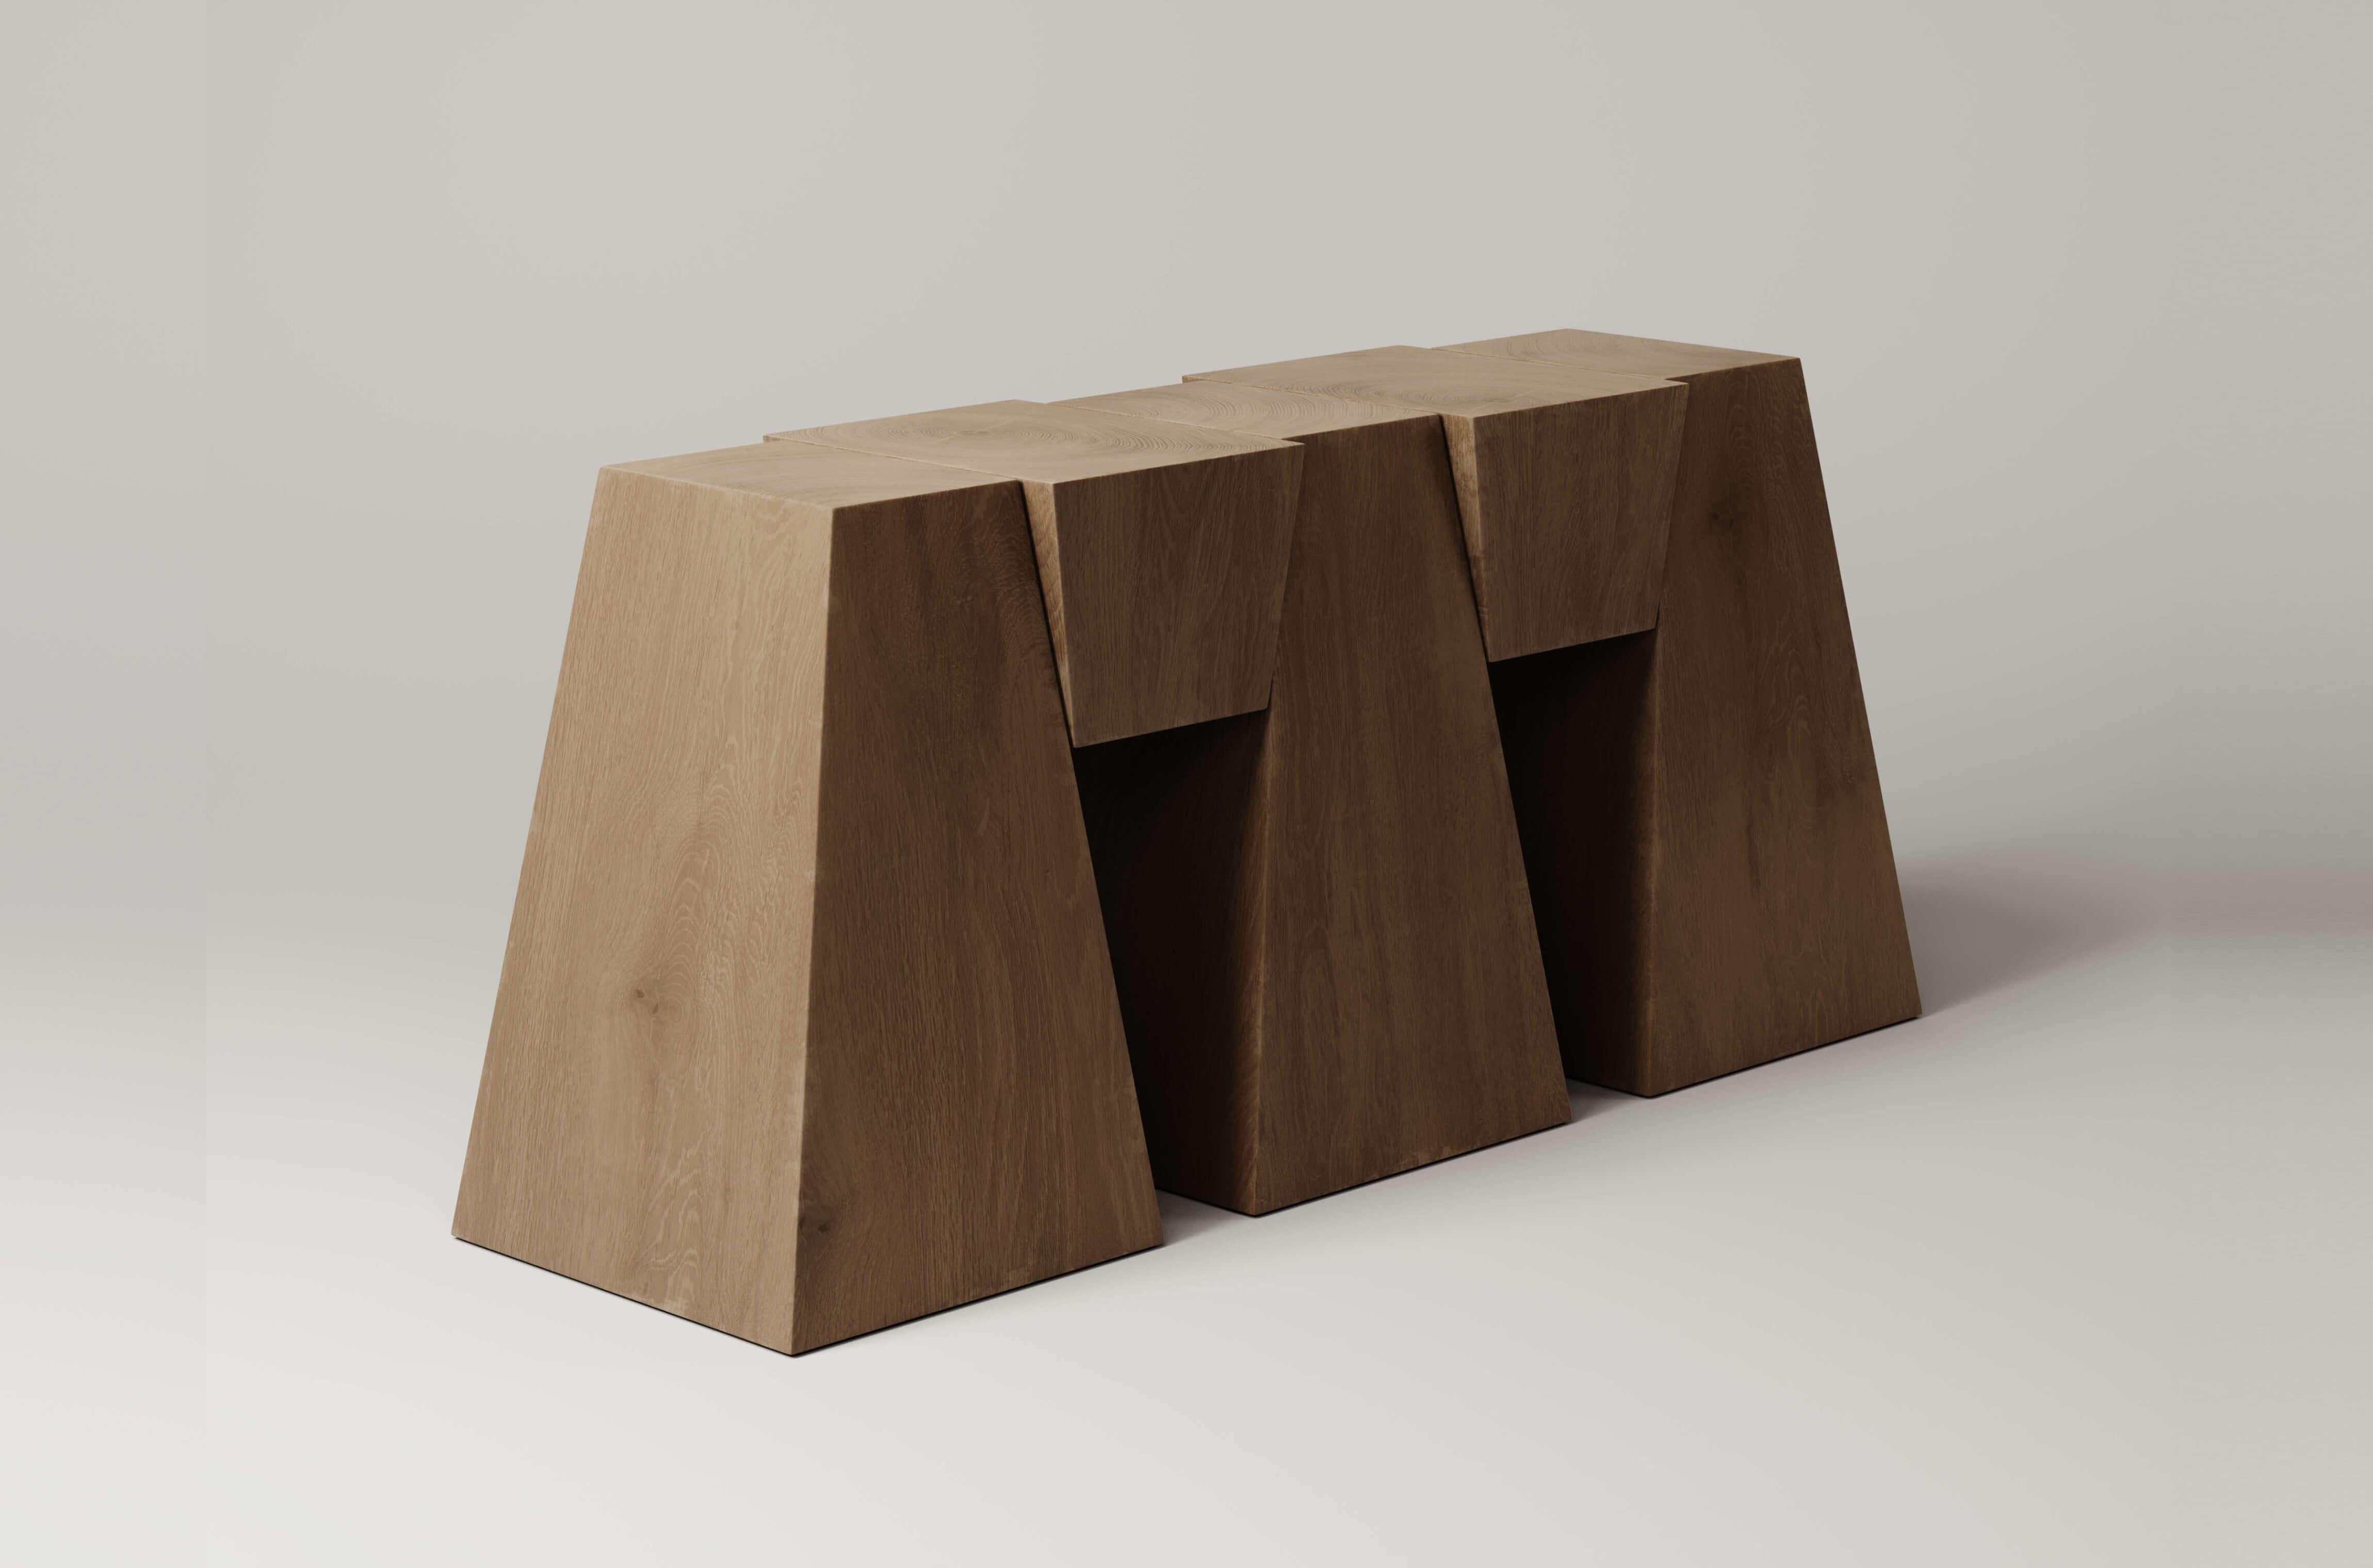 M_006 White Oak Console by Monolith Studio
Signed and Numbered.
Dimensions: D 45 x W 165 x H 78 cm.
Materials: White oak.

Available in travertine, walnut, white oak and lava rock.  Please contact us. 

Monolith, founded in 2022 by Marc Personick,